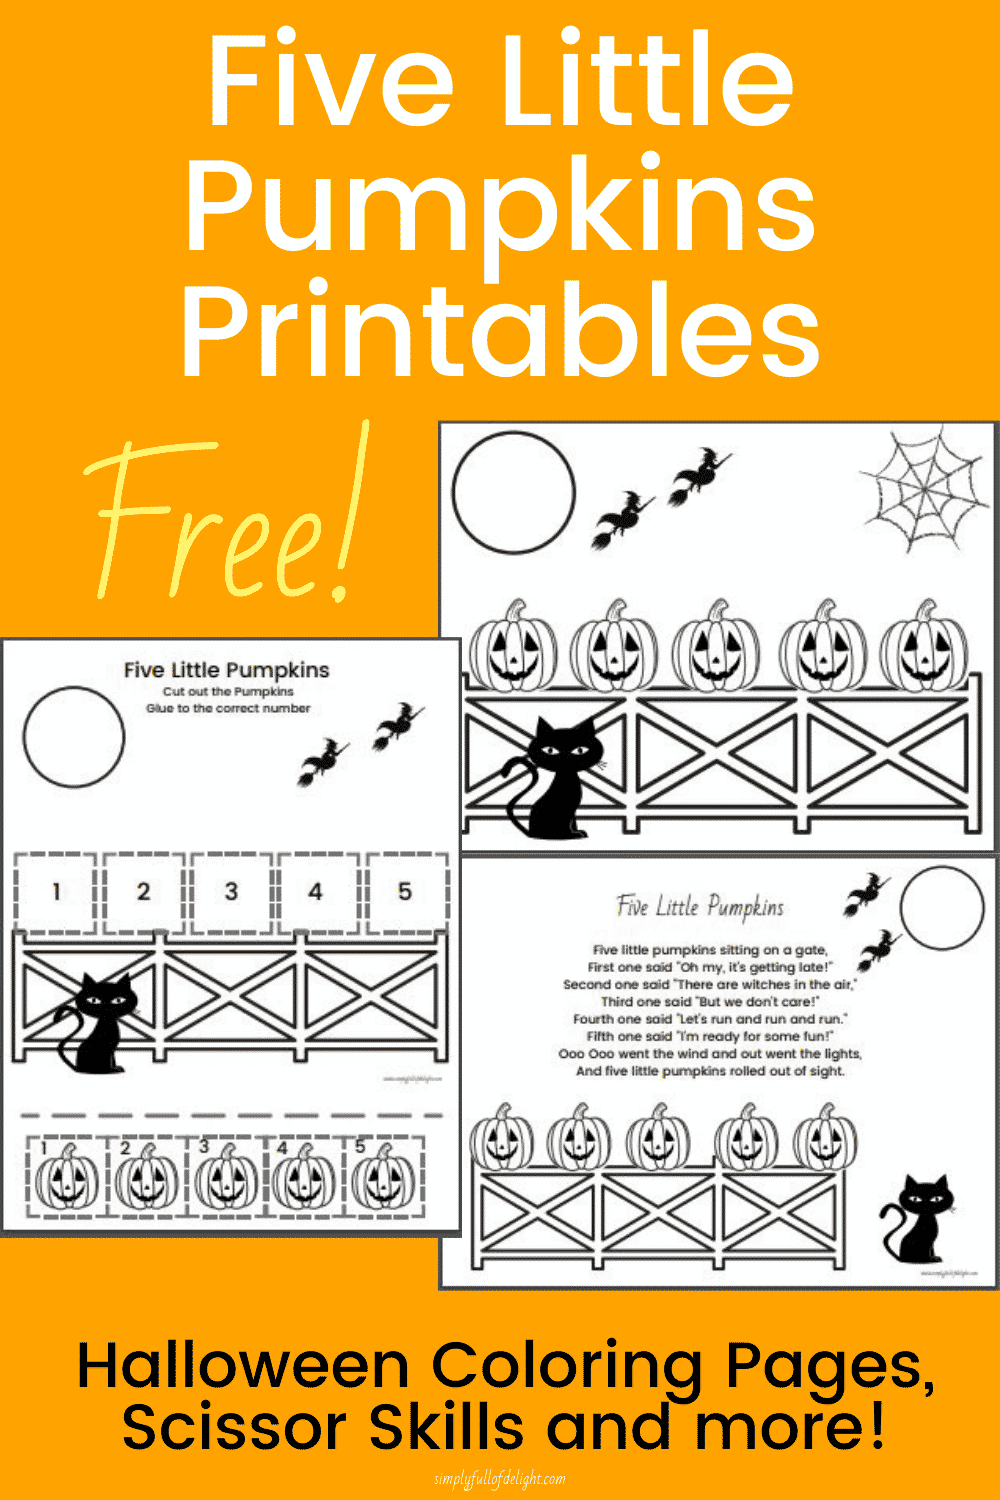 5 Little Pumpkins Coloring Page & Activity Simply Full of Delight